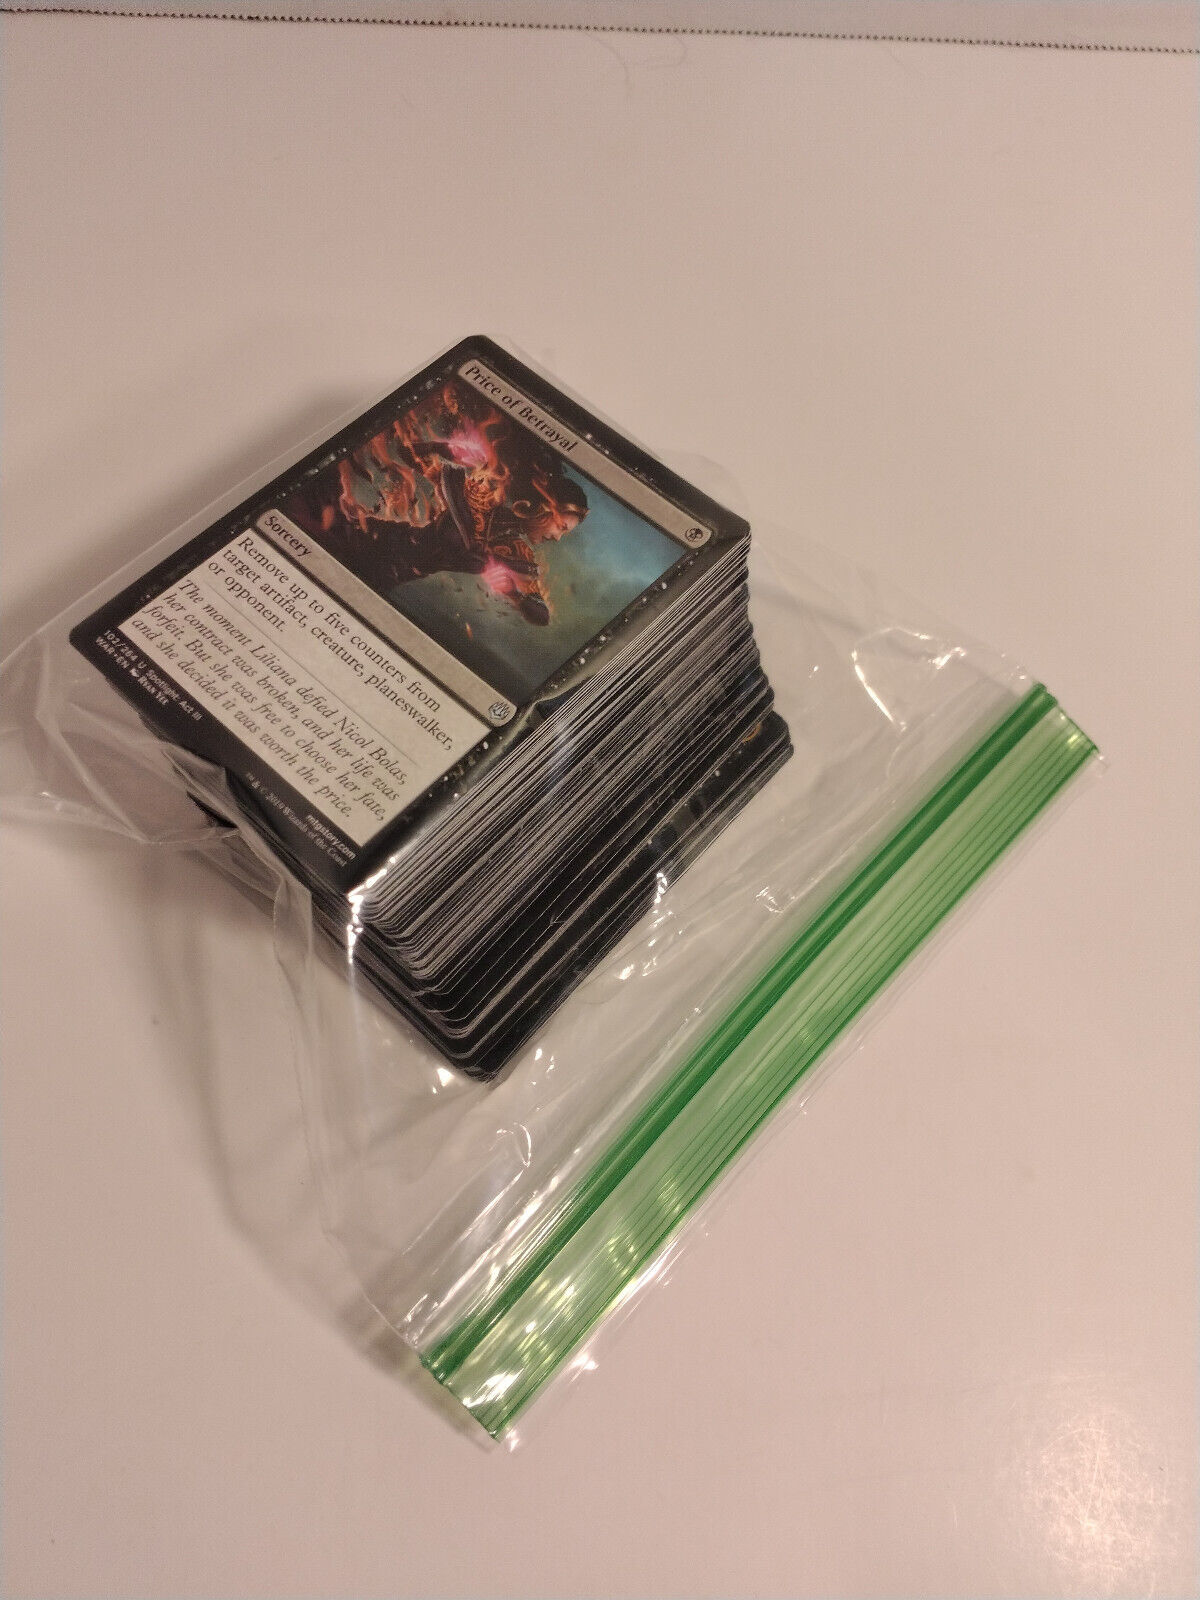 Magic The Gathering Trading Cards Sorted Lot Black Wizards of the Coast WOTC MTG - $12.00